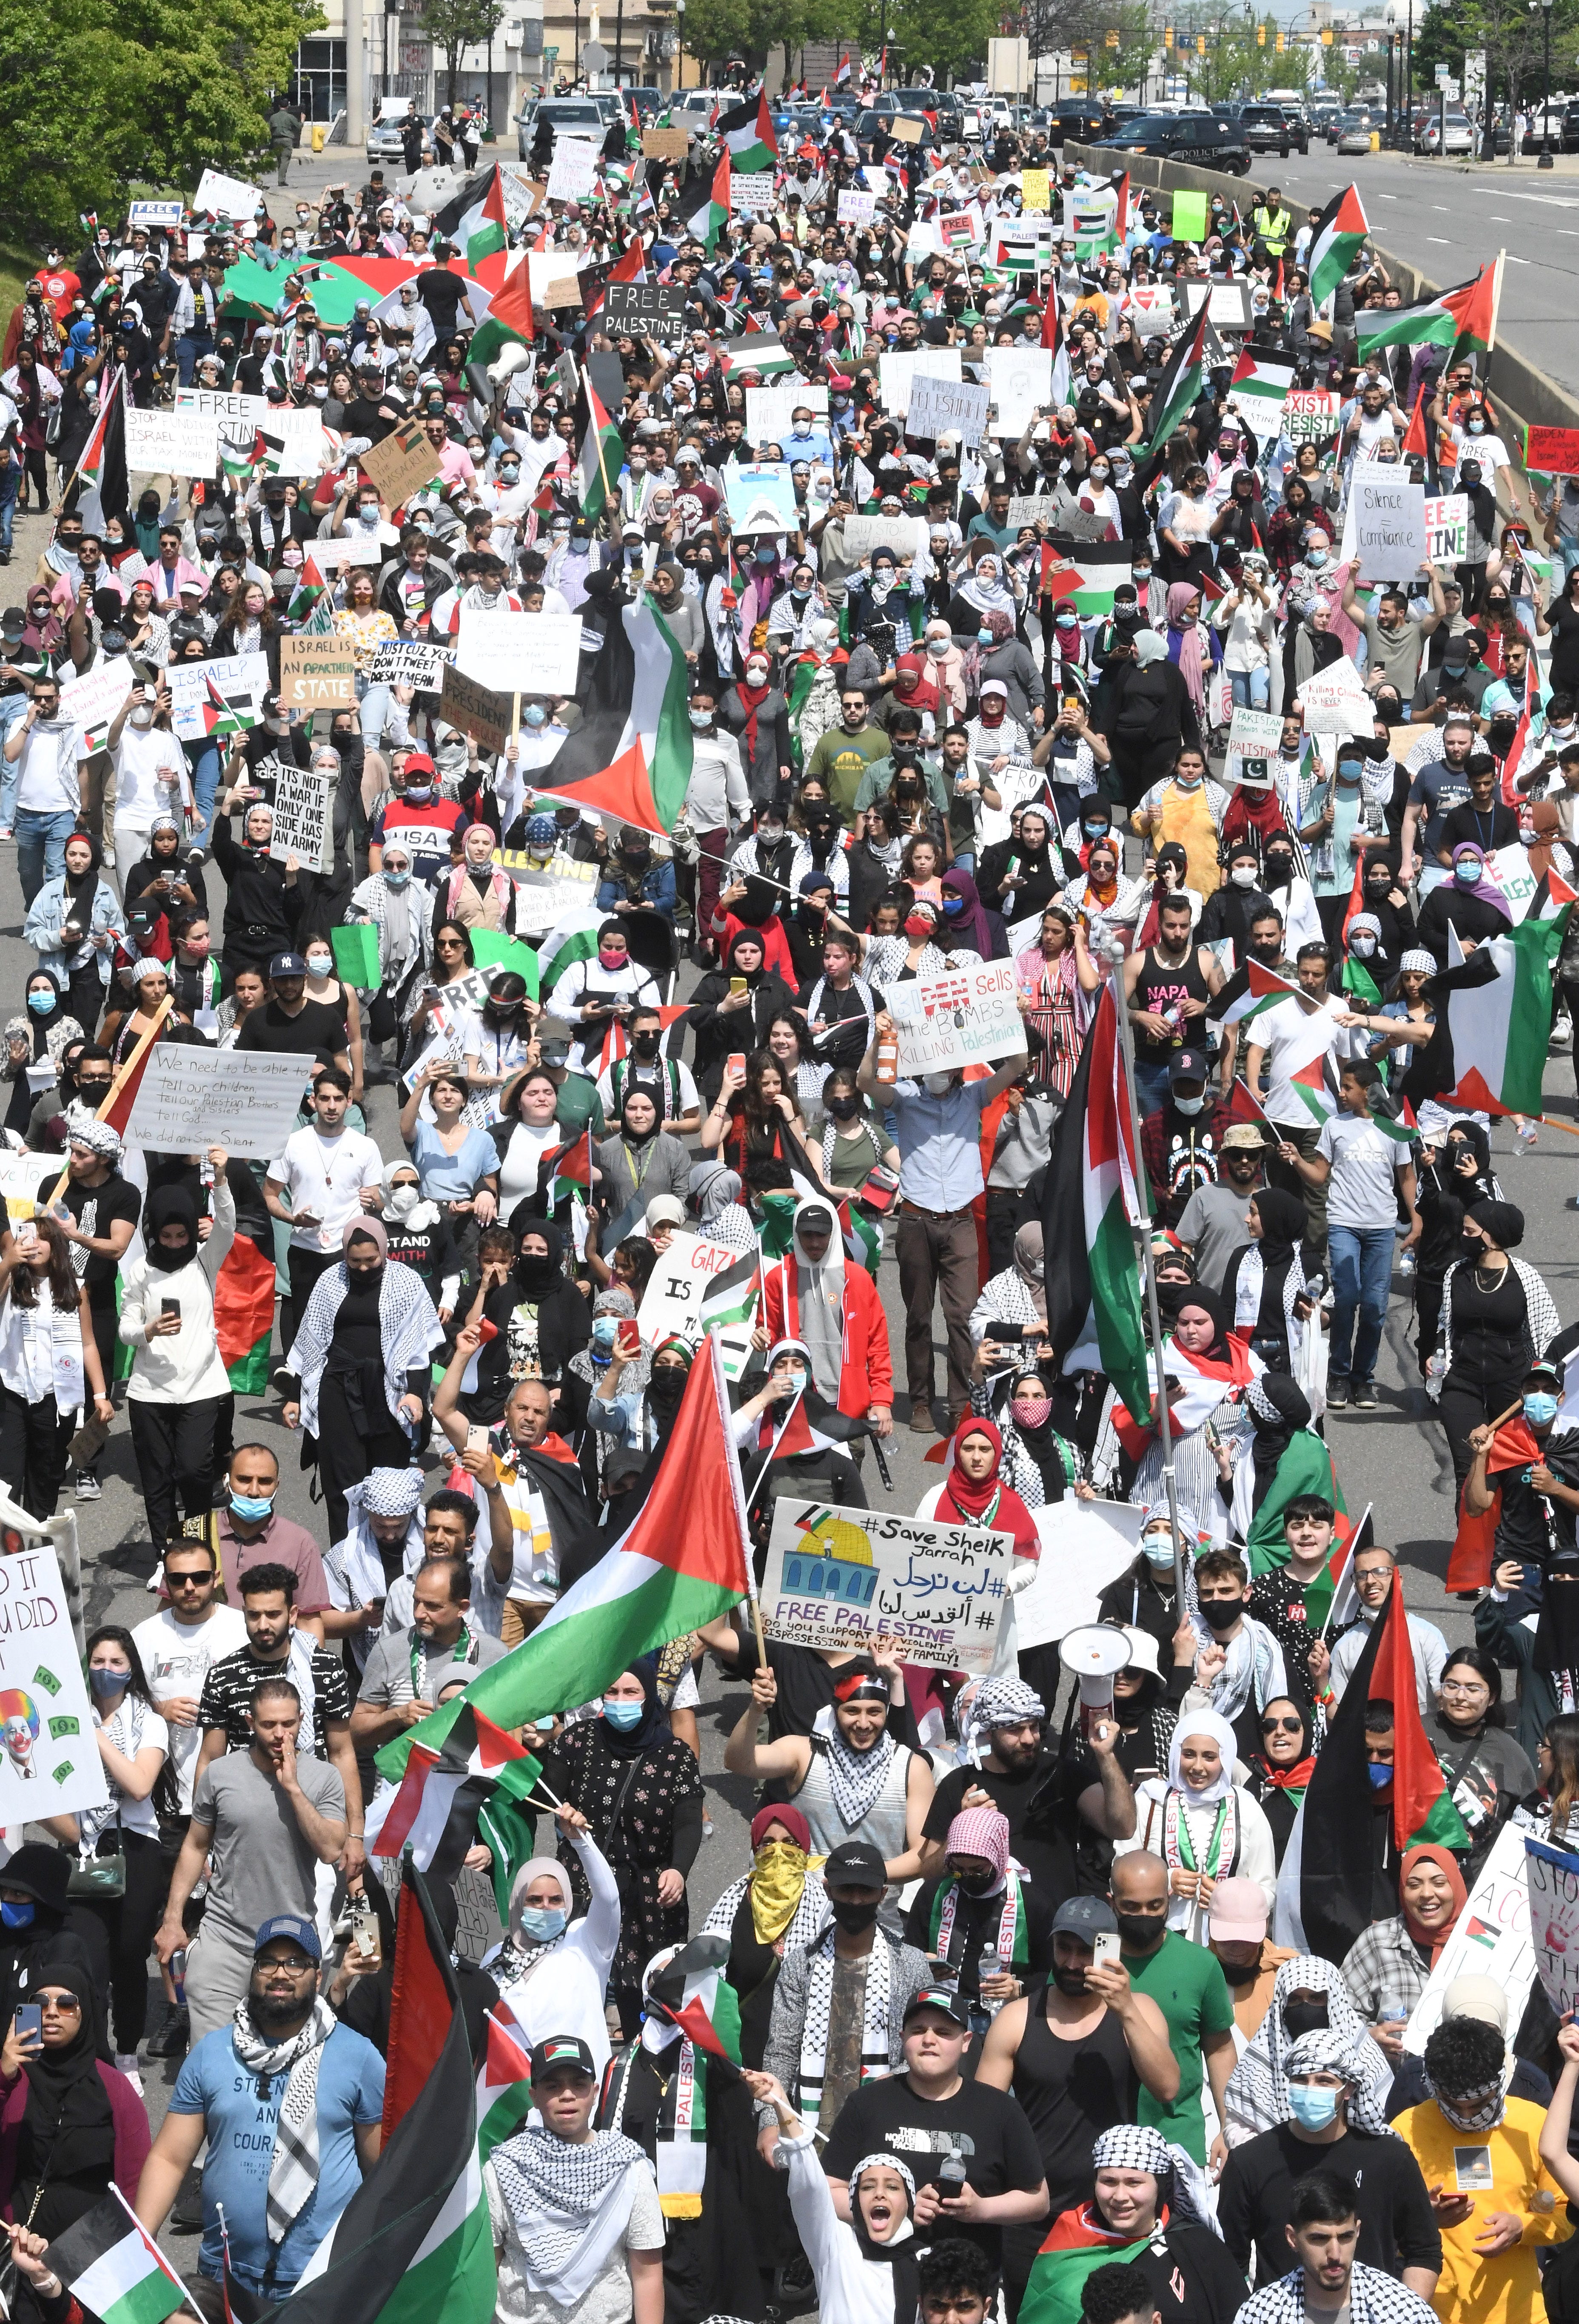 Thousands of Palestinian supporters march along Michigan Avenue in Dearborn while President Joe Biden visits a Ford electric vehicle factory nearby. The protestors were calling for Biden to pressure Israel to stop bombing Palestinians in Gaza.